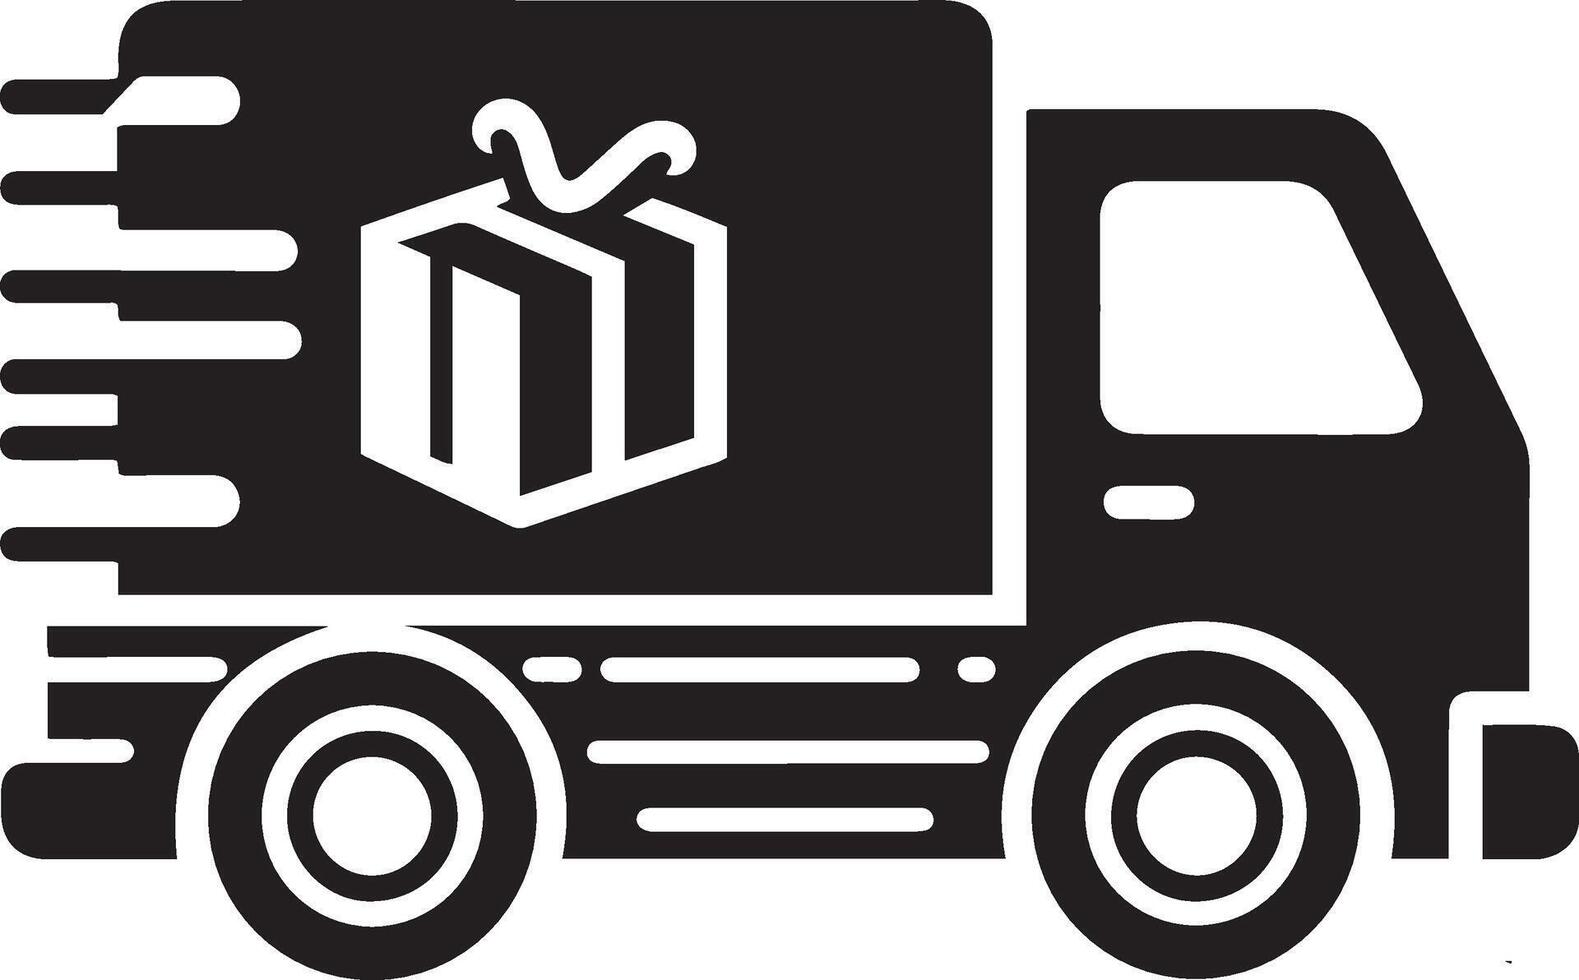 Fast delivery truck flat vector icon. Express delivery symbol. Logistic trucking sign for apps and websites.